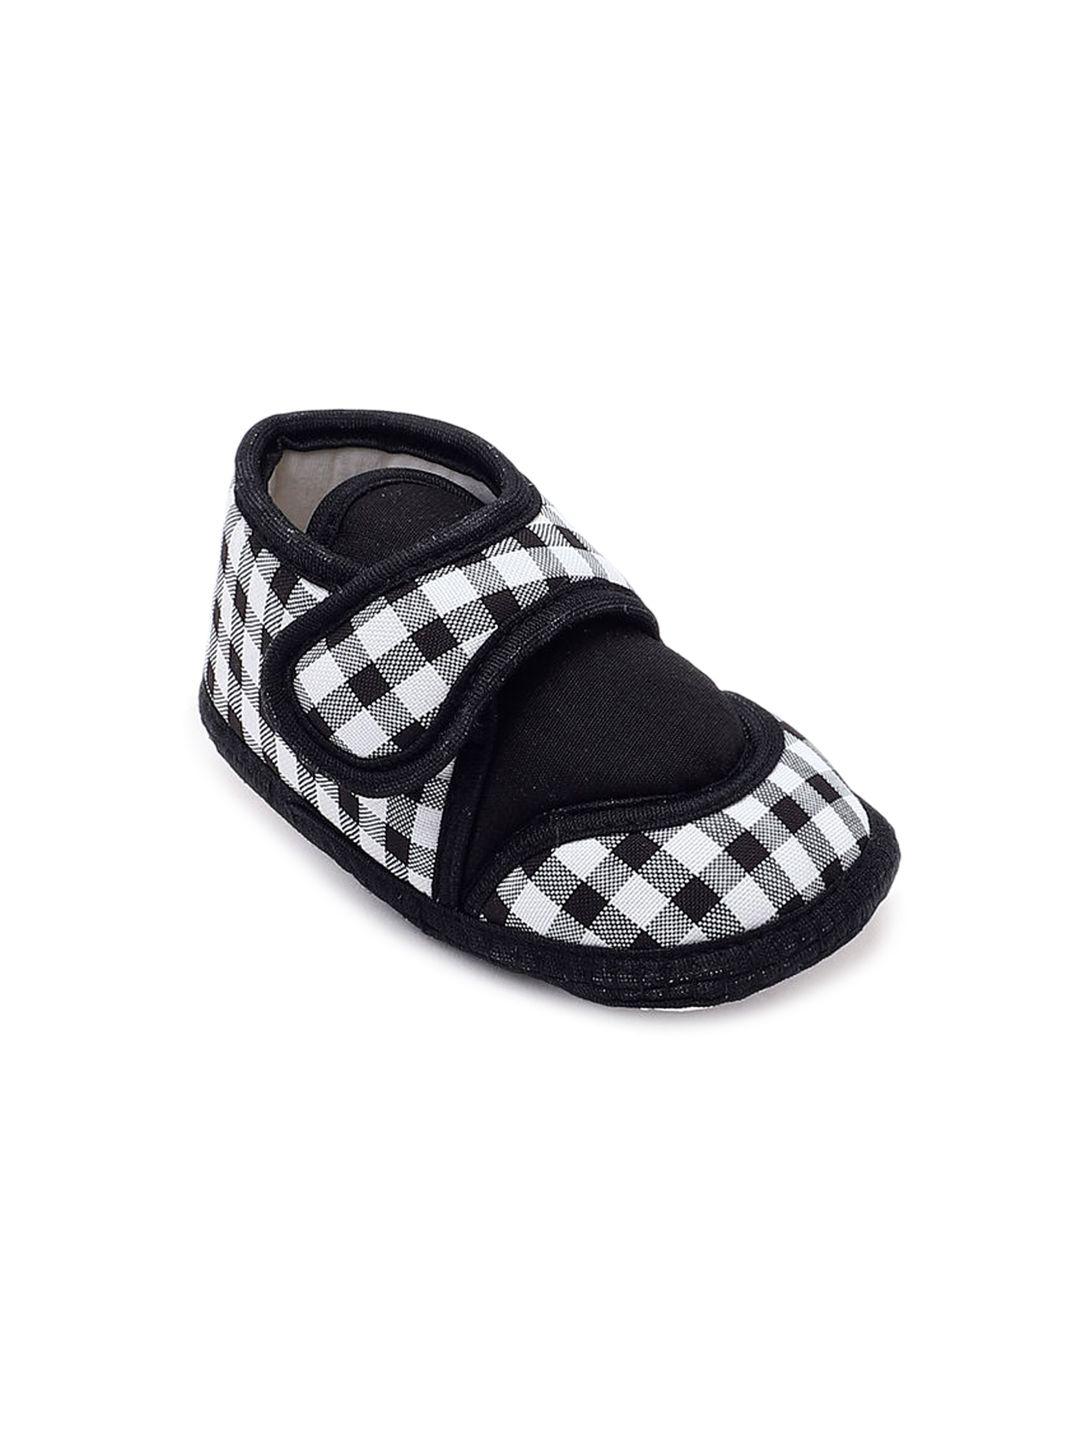 chiu-infants-checked-cotton-booties